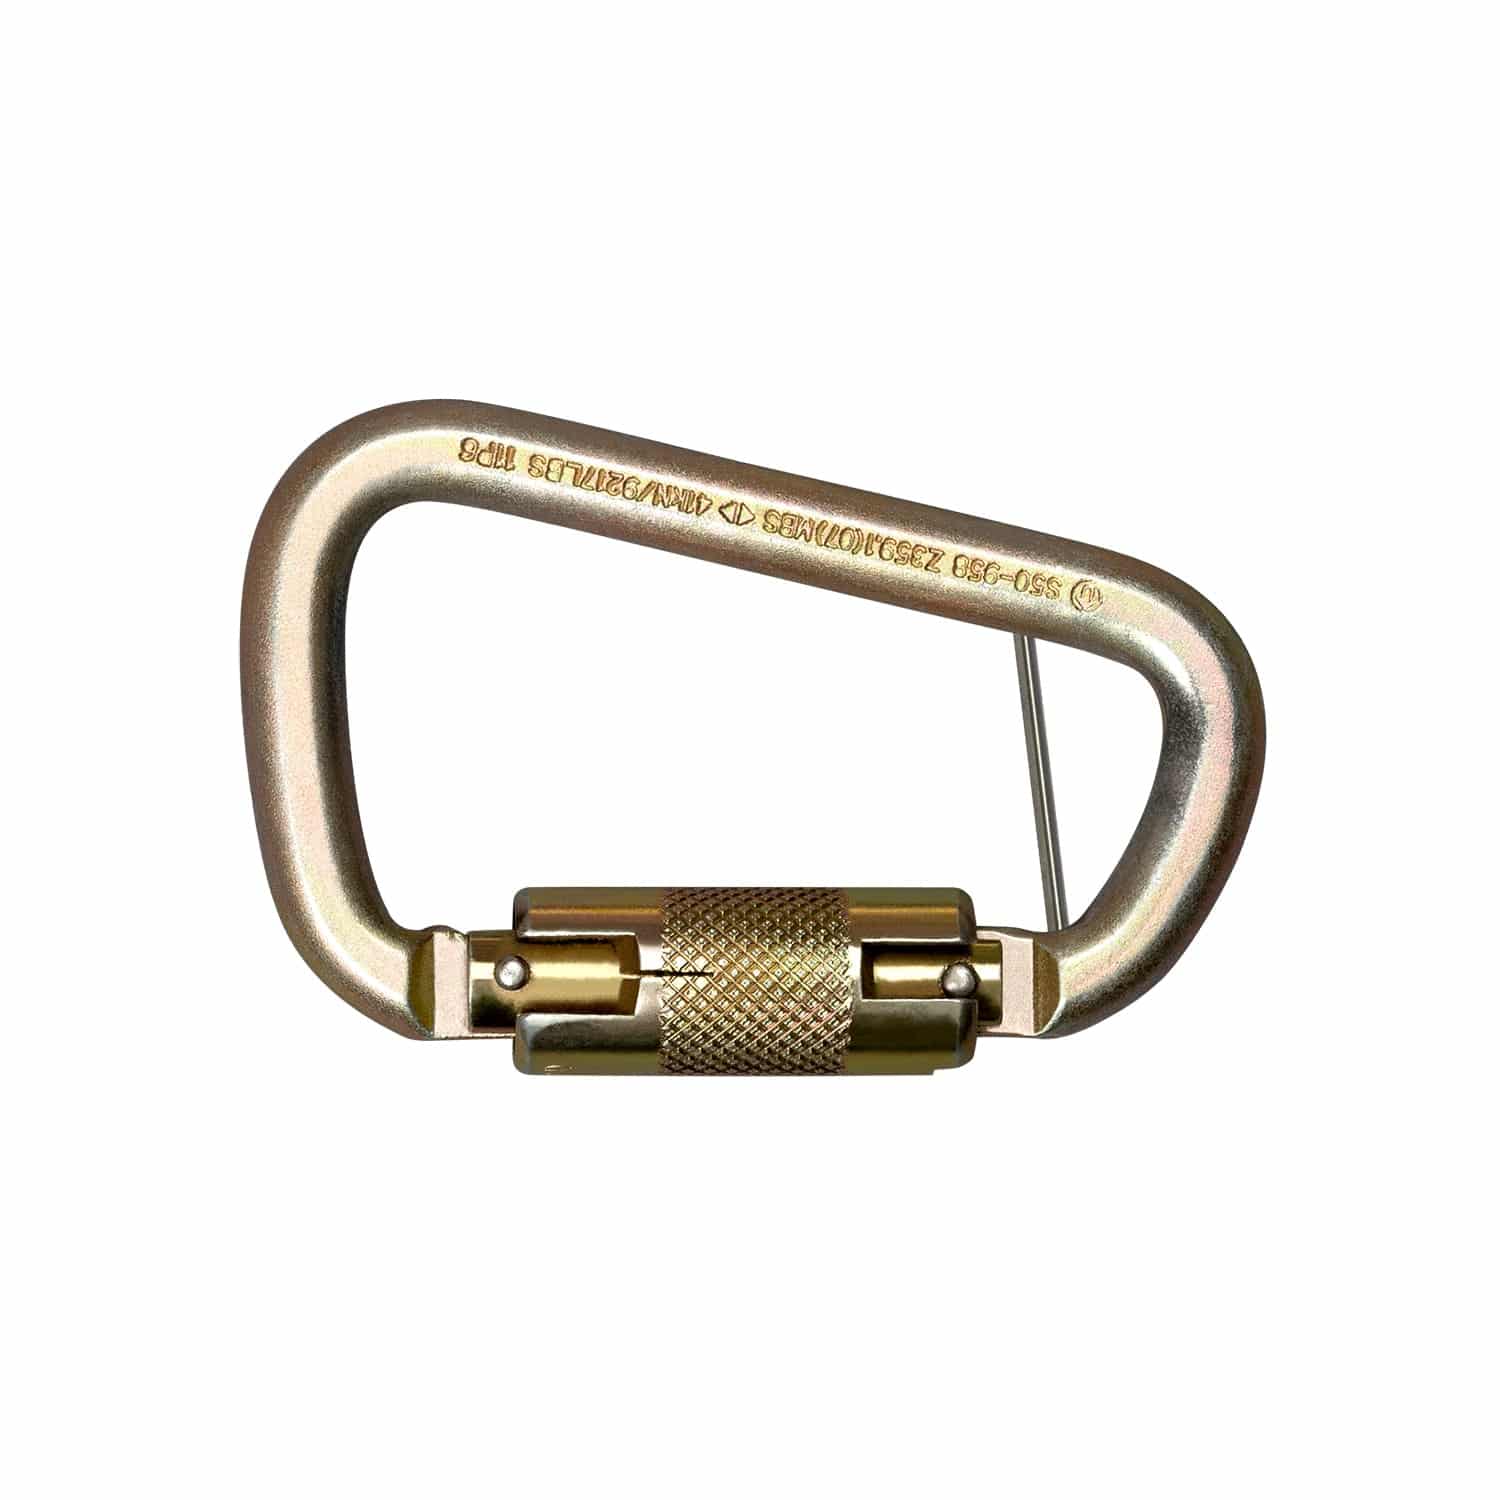 Steel Twist Lock Carabiner with - Holes Captive Pin 5005T Manufacturing - Buckingham